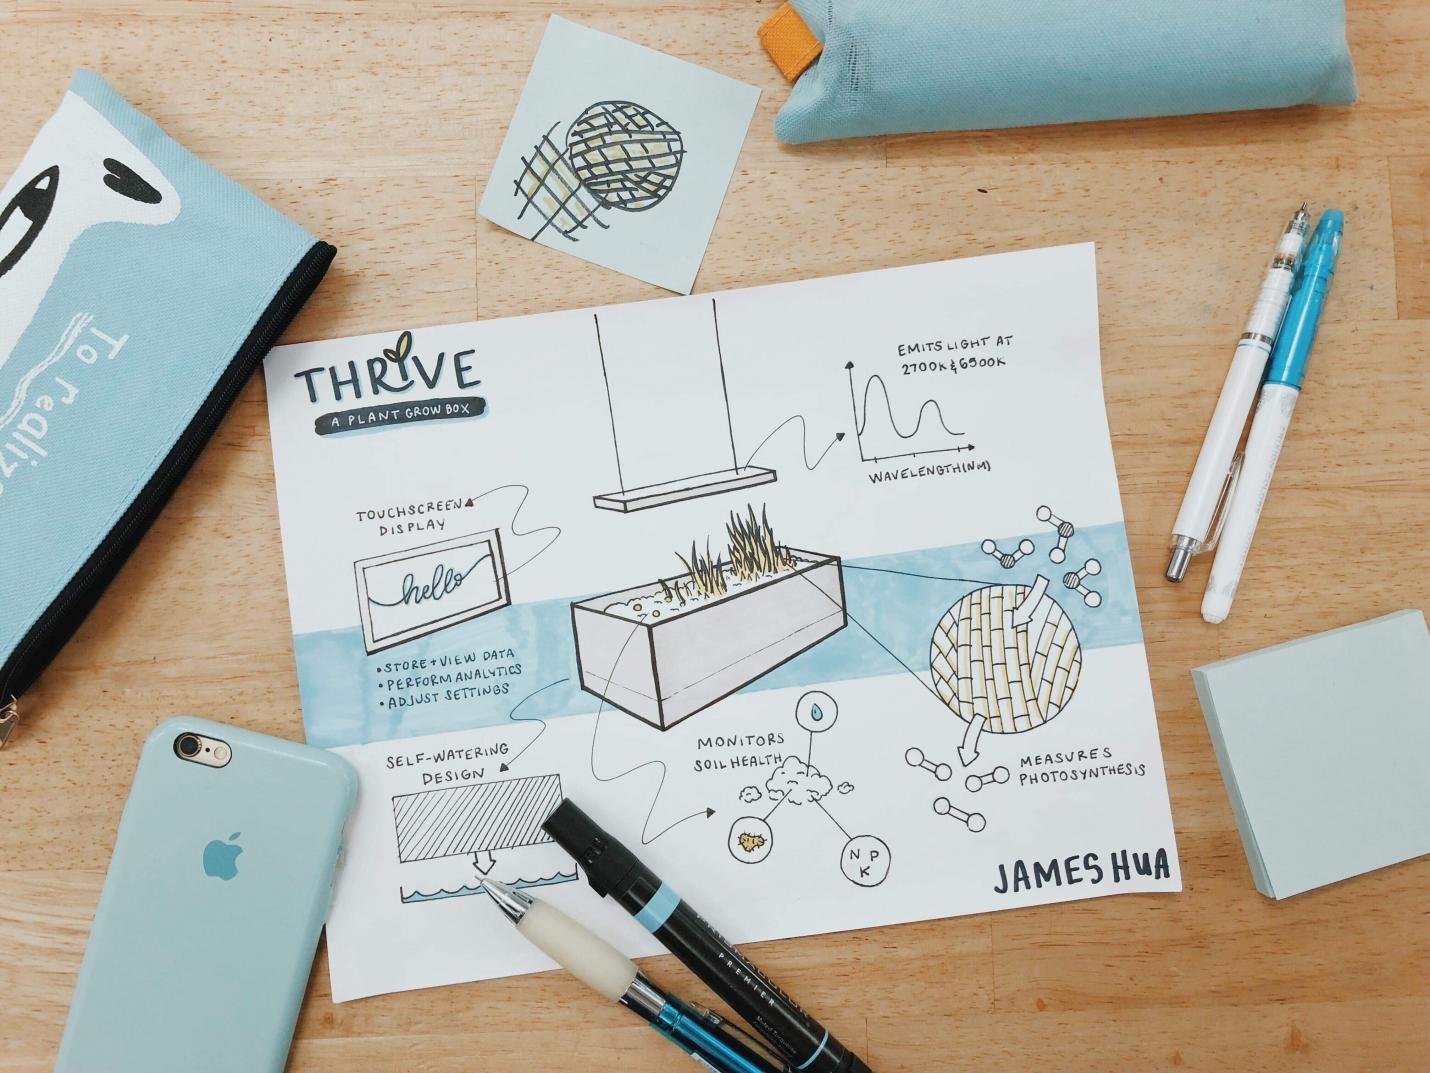 Thrive, a student project by James Hua